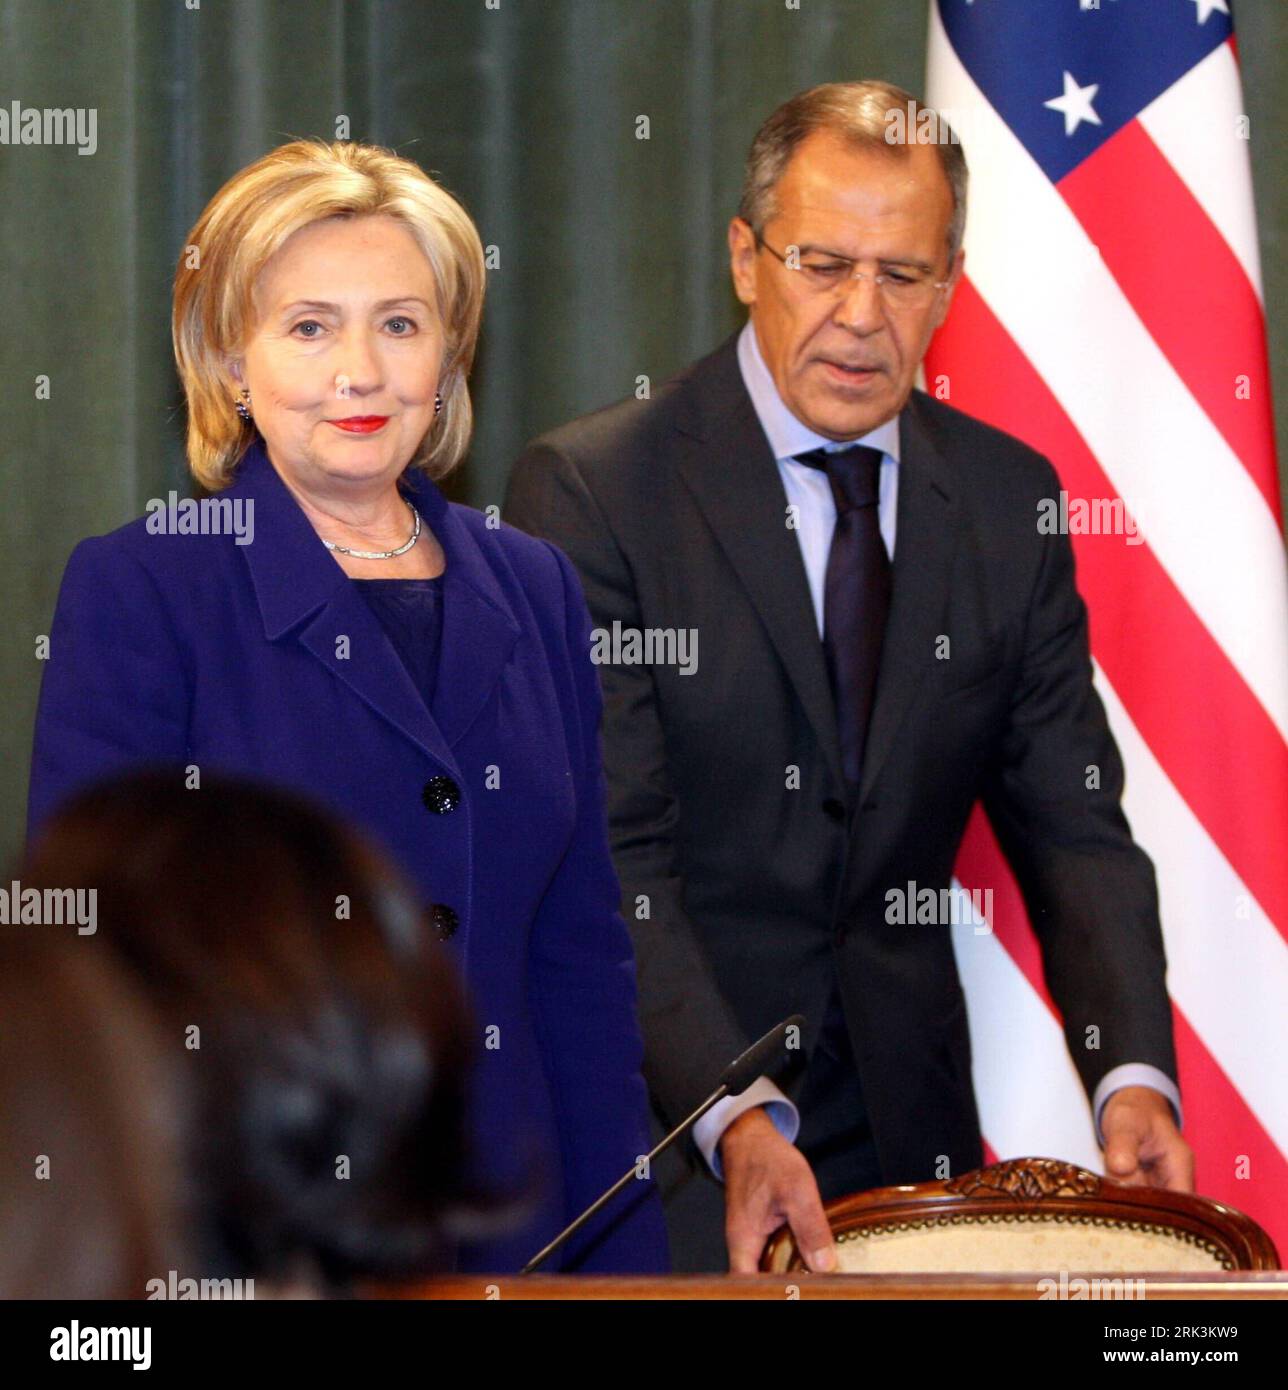 Bildnummer: 53527858  Datum: 13.10.2009  Copyright: imago/Xinhua (091013) -- MOSCOW, Oct. 13, (Xinhua) -- U.S. Secretary of State Hillary Clinton (L) and Russian Foreign Minister Sergei Lavrov attend a news conference after their meeting in Moscow, capital of Russia, on Oct, 13, 2009. Russian Foreign Minister Sergei Lavrov said on Tuesday that Russia and the United States have made considerable progress on a new nuclear arms reduction treaty. (Xinhua/Lu Jinbo) (jl) (5)RUSSIA-U.S.-POLITICS PUBLICATIONxNOTxINxCHN People Politik kbdig xsk 2009 quadrat premiumd    Bildnummer 53527858 Date 13 10 20 Stock Photo